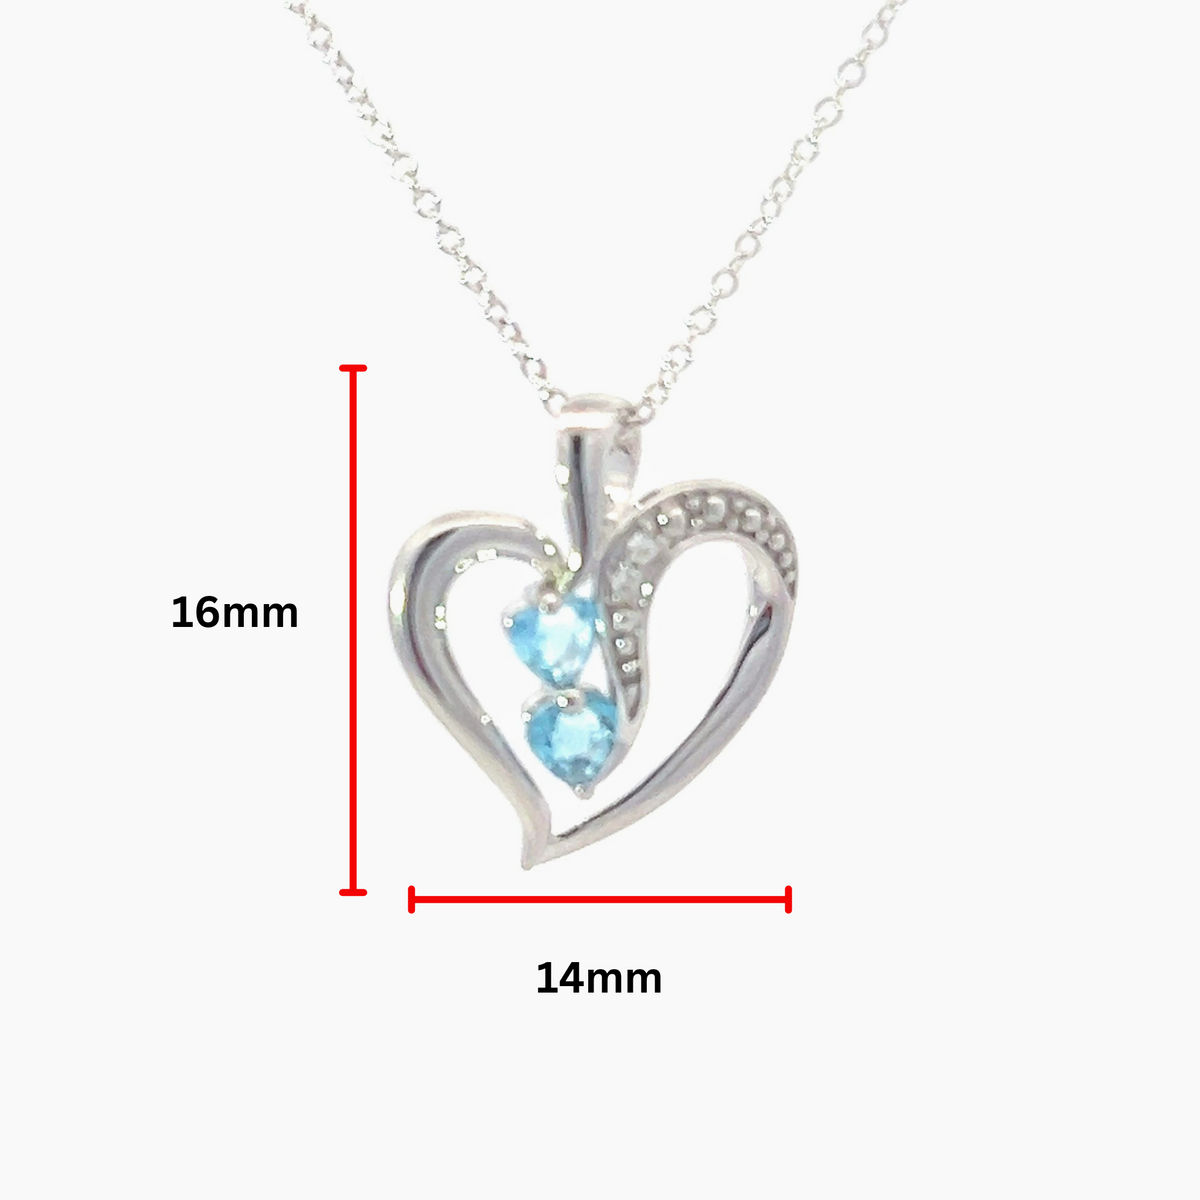 10K White Gold Swiss Blue Topaz and Diamond Heart Necklace - 18 Inches